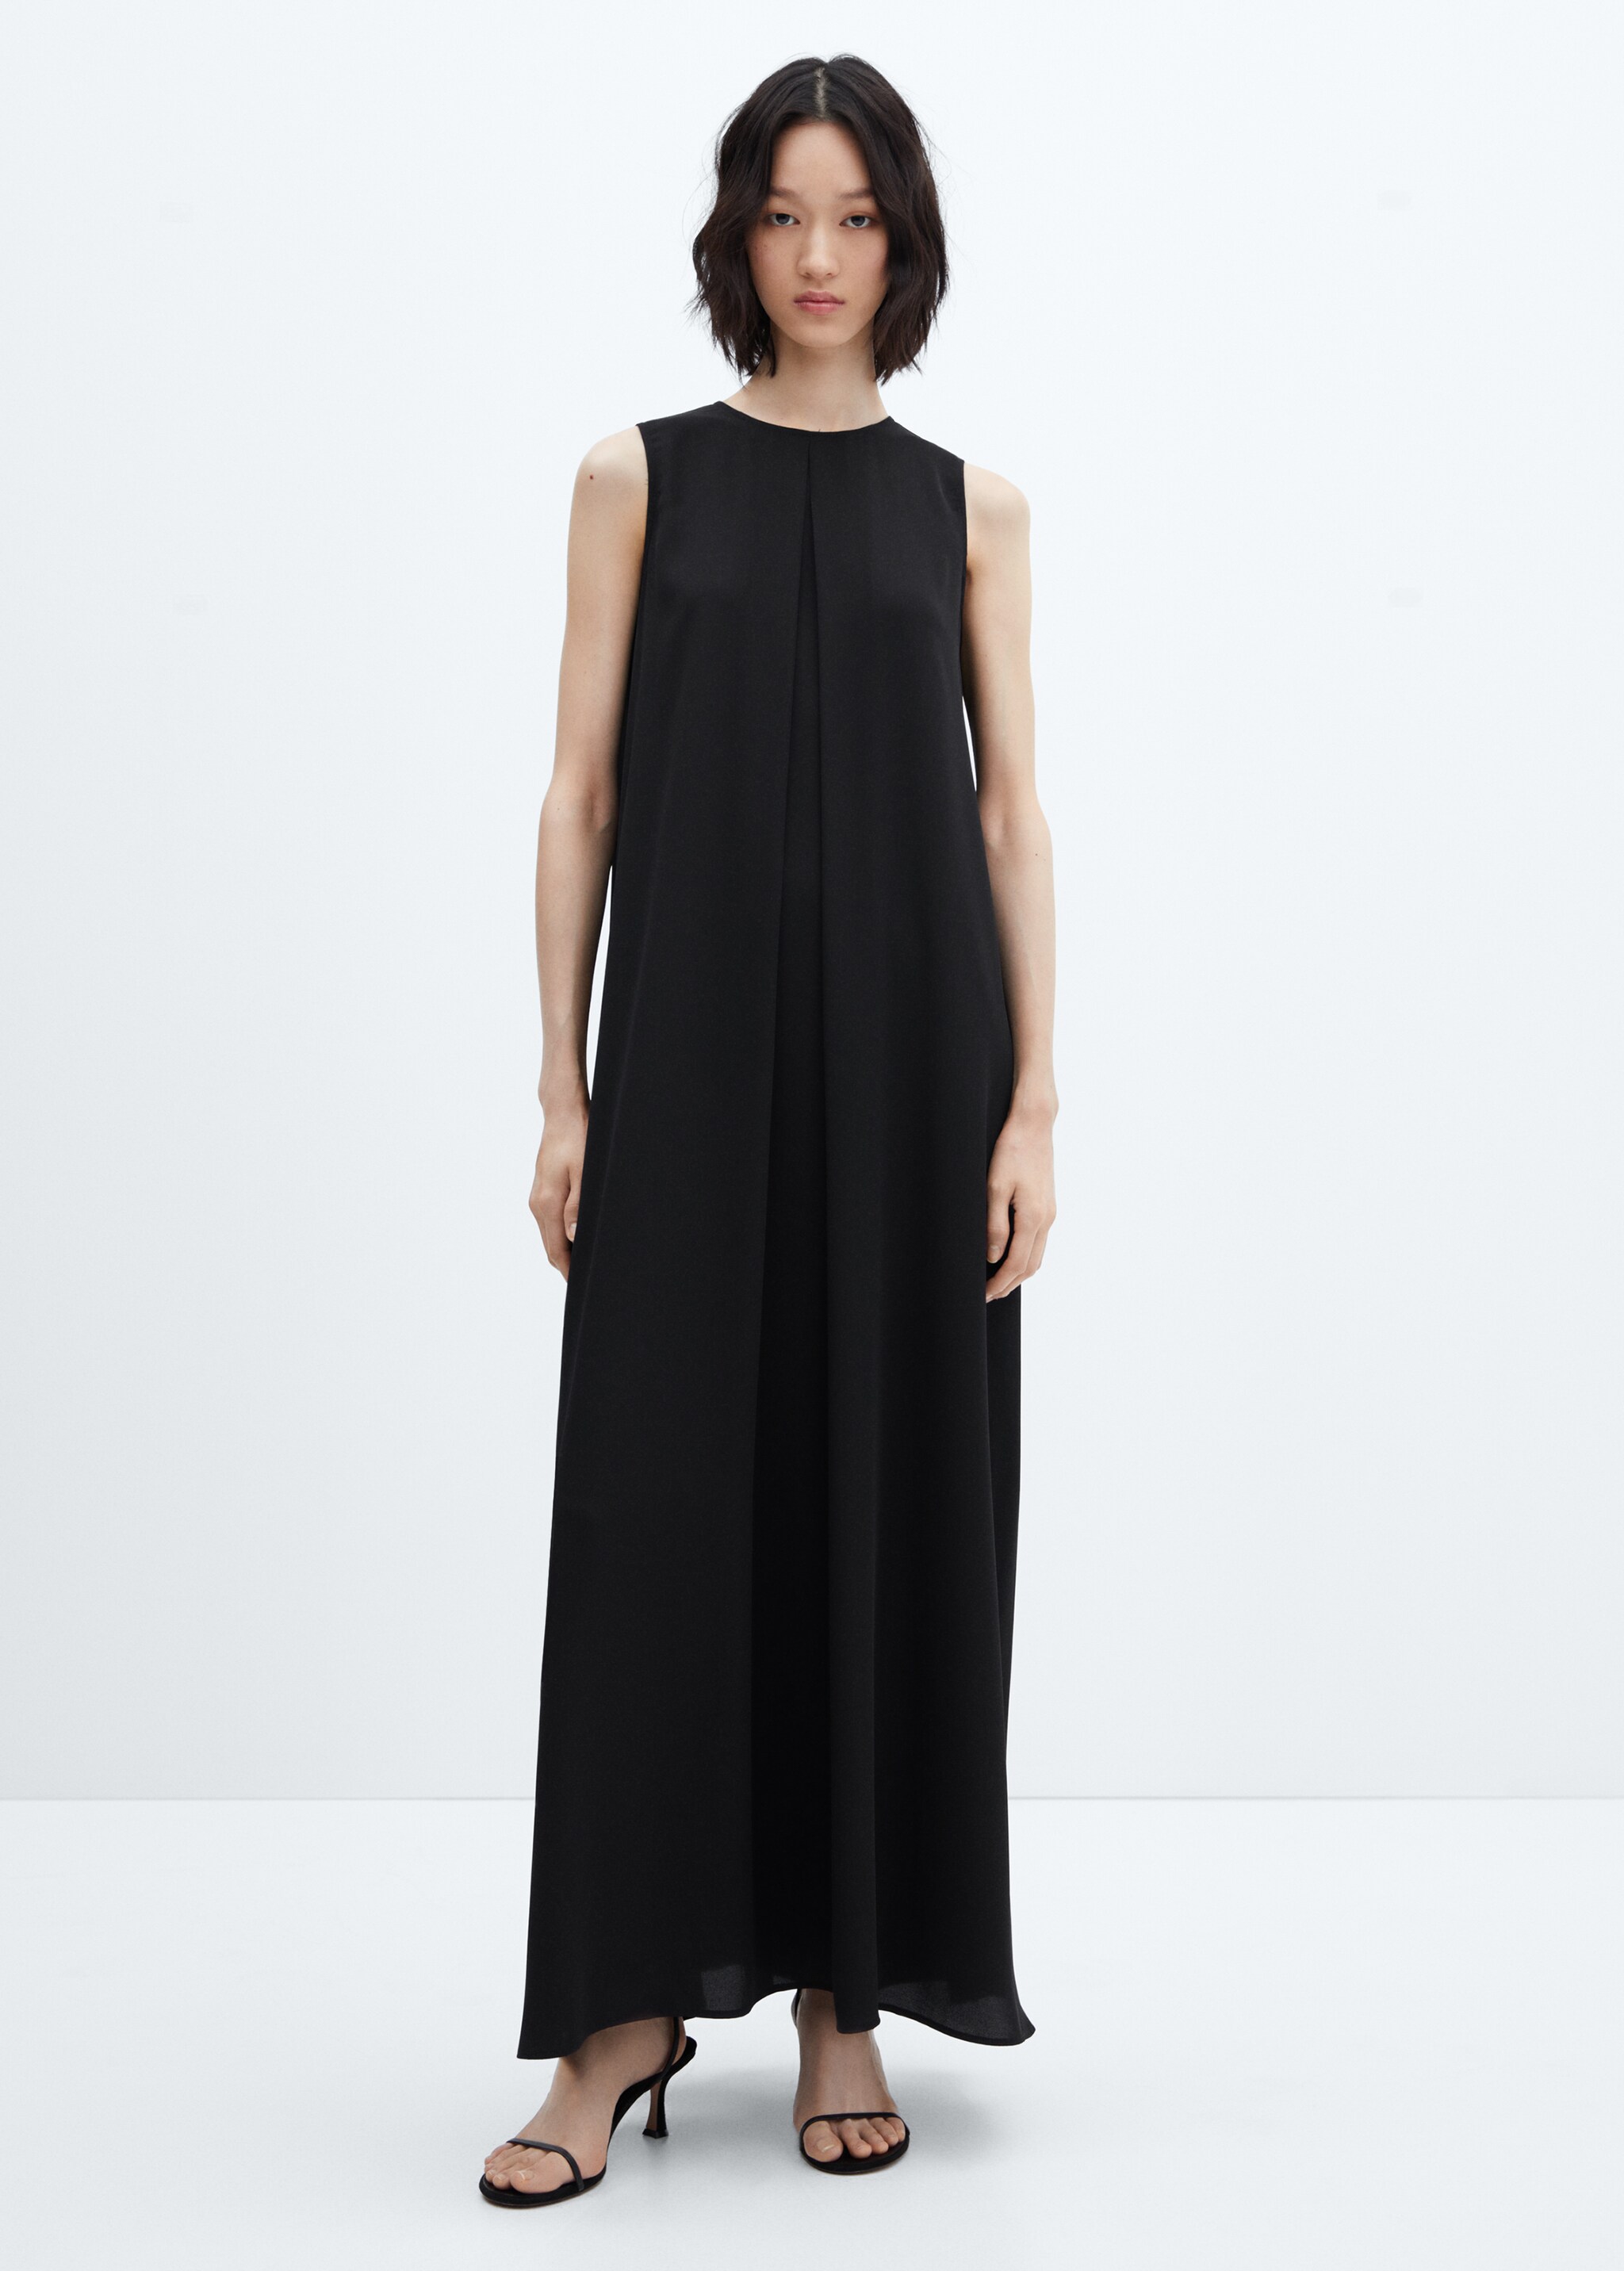 Long dress with pleat detail - General plane